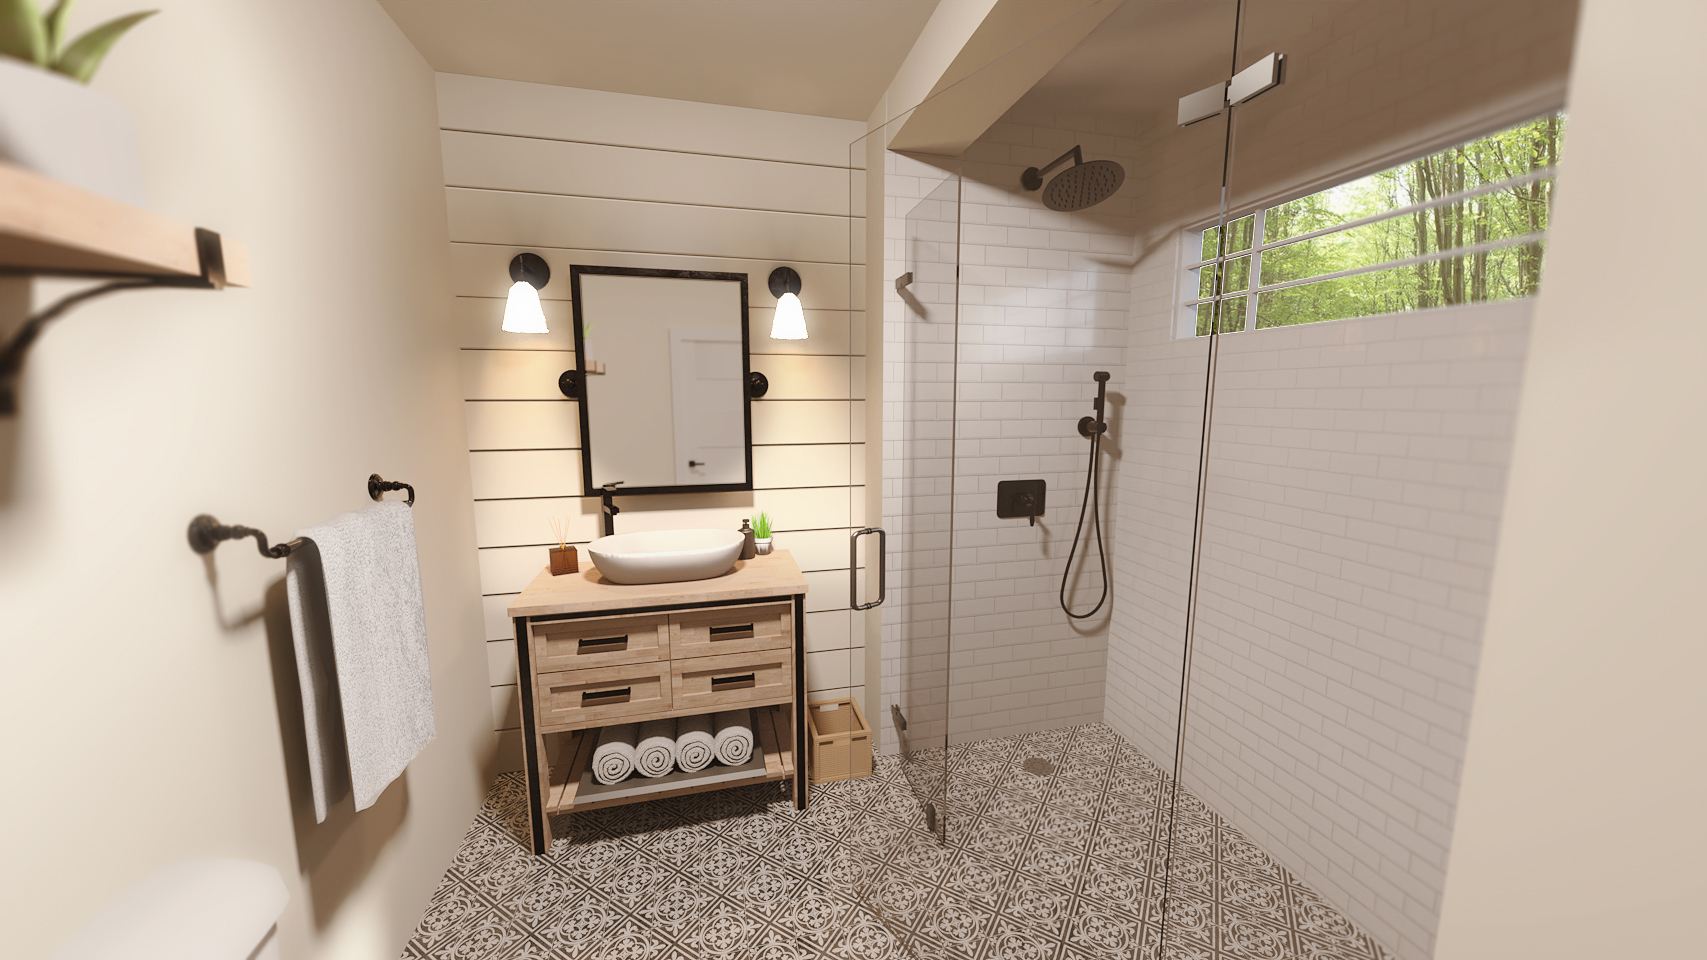 Transitional Bathroom by: PerspectX, 3D Models by Daz 3D